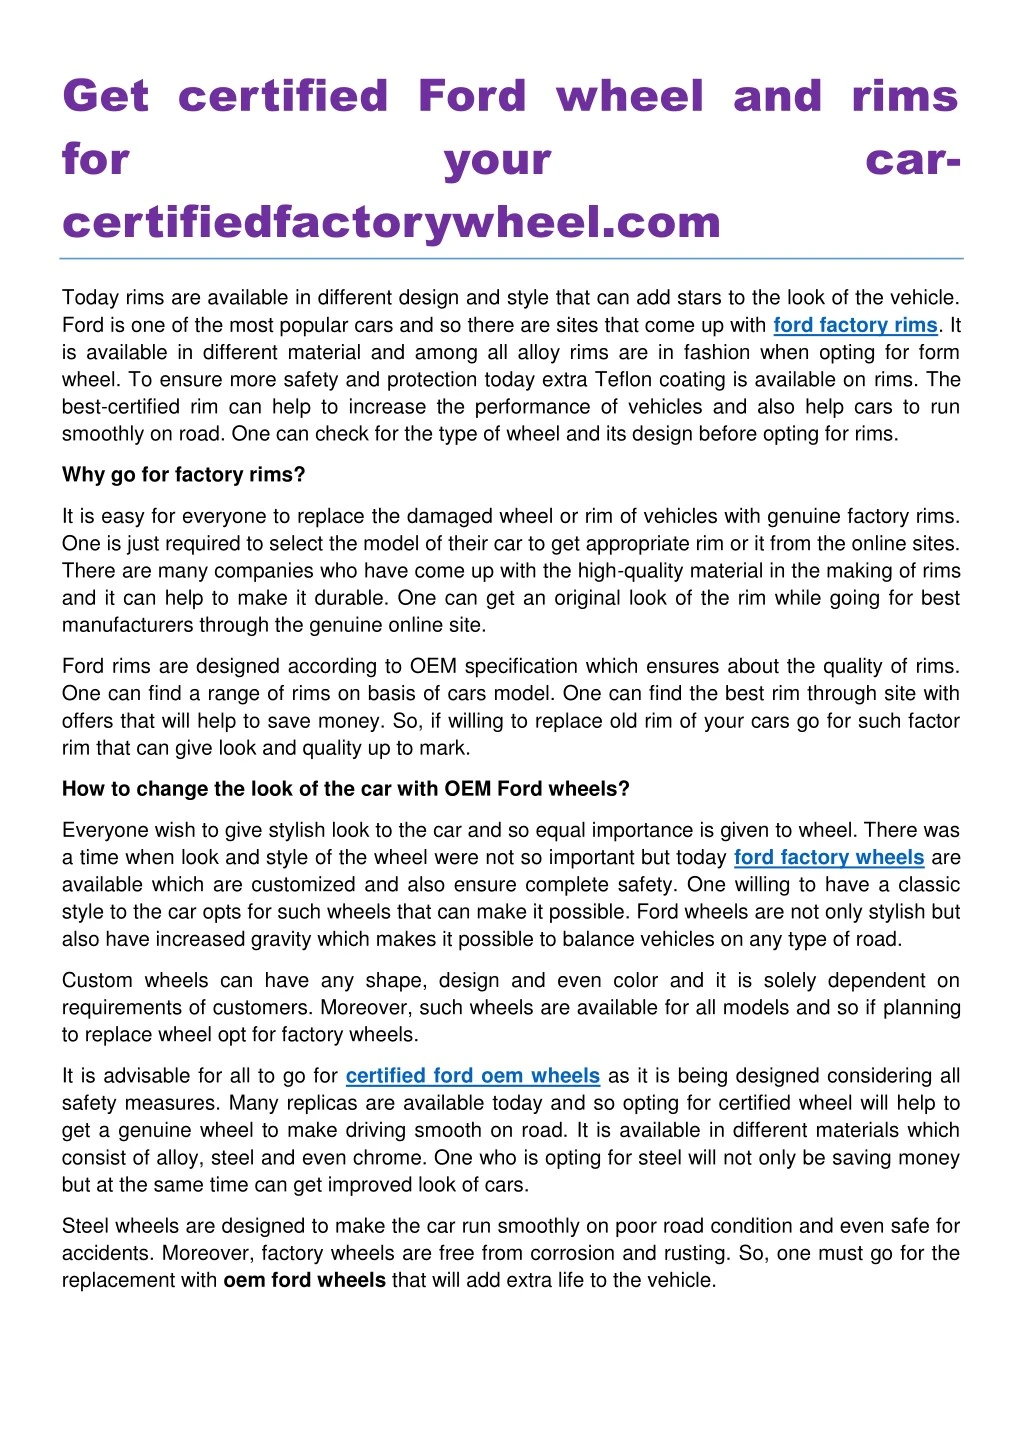 get certified ford wheel and rims for your